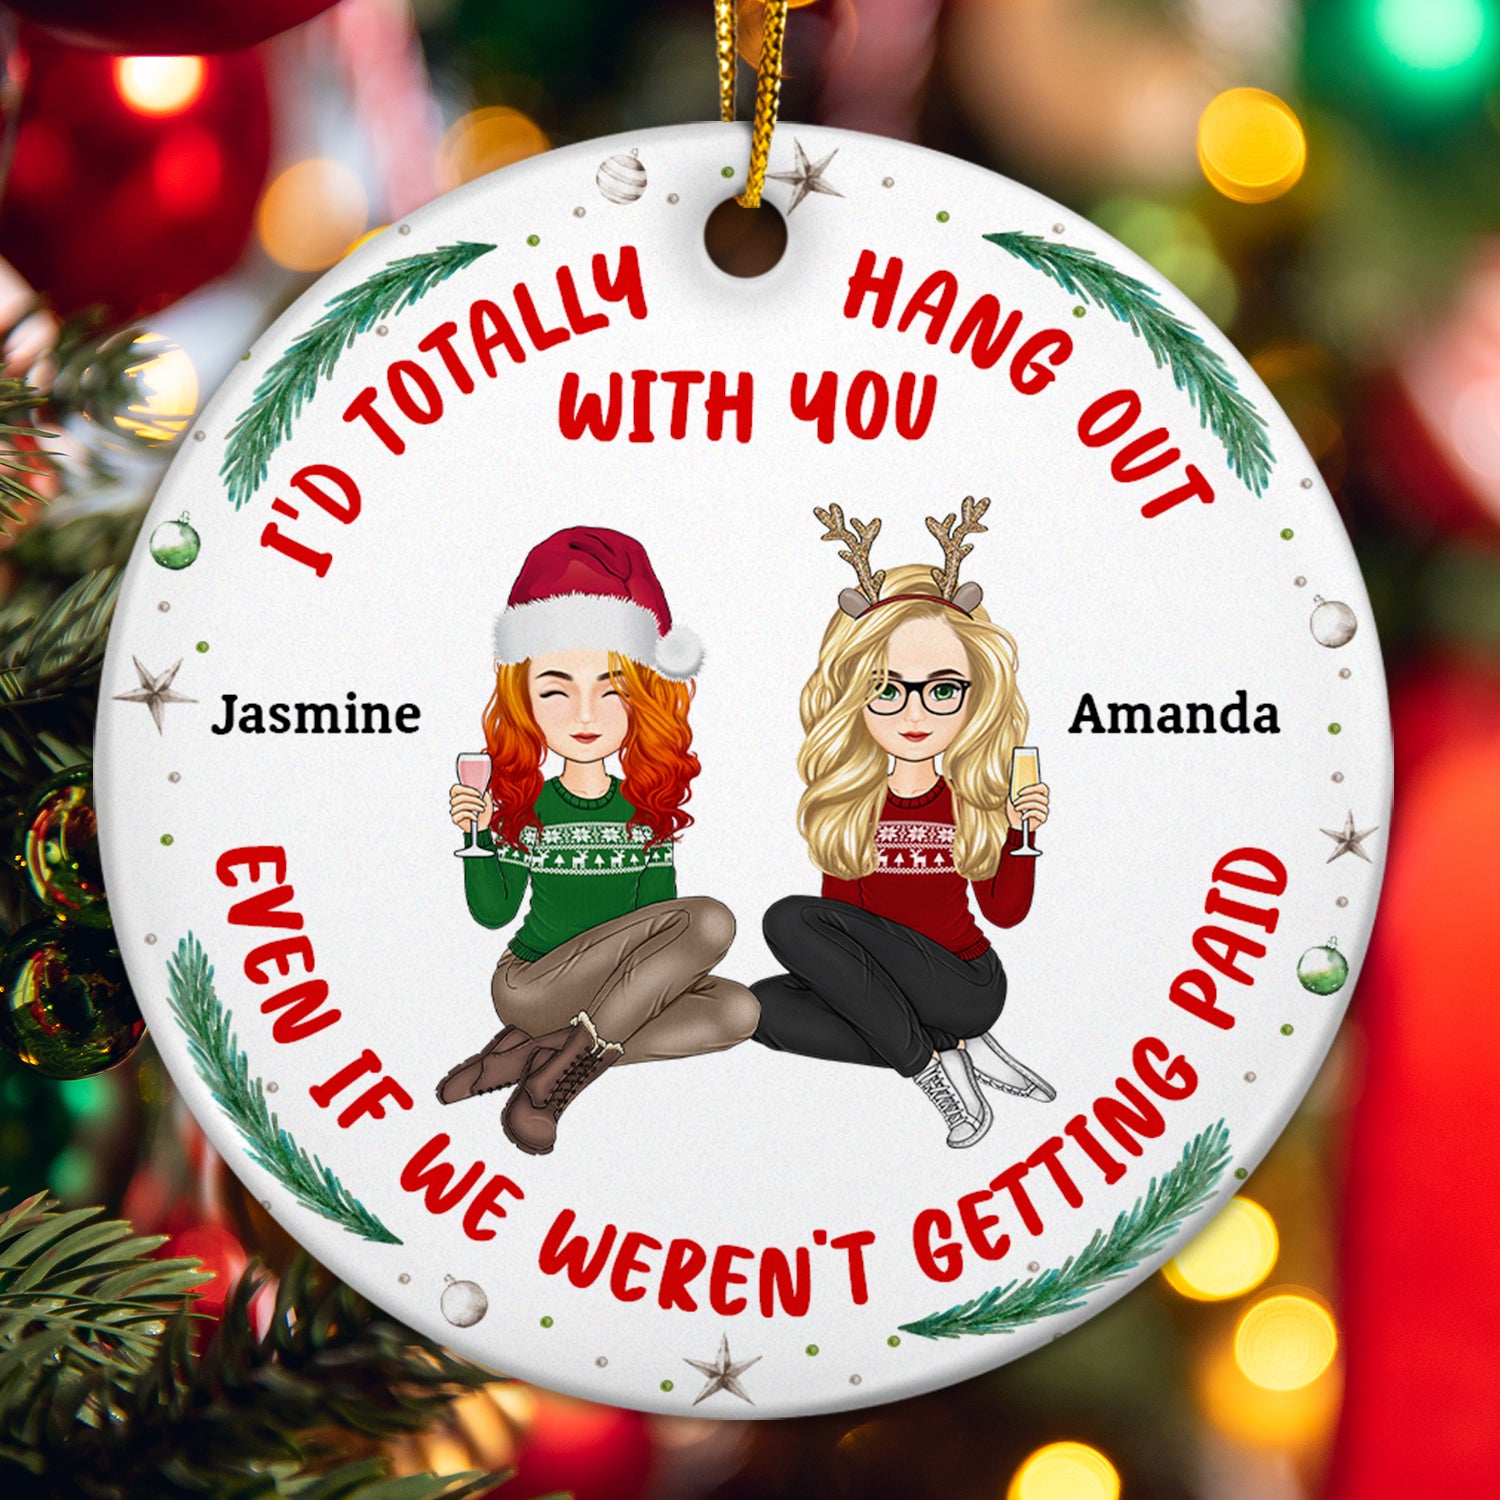 Hang Out With You - Christmas Gift For Colleagues - Personalized Circle Ceramic Ornament